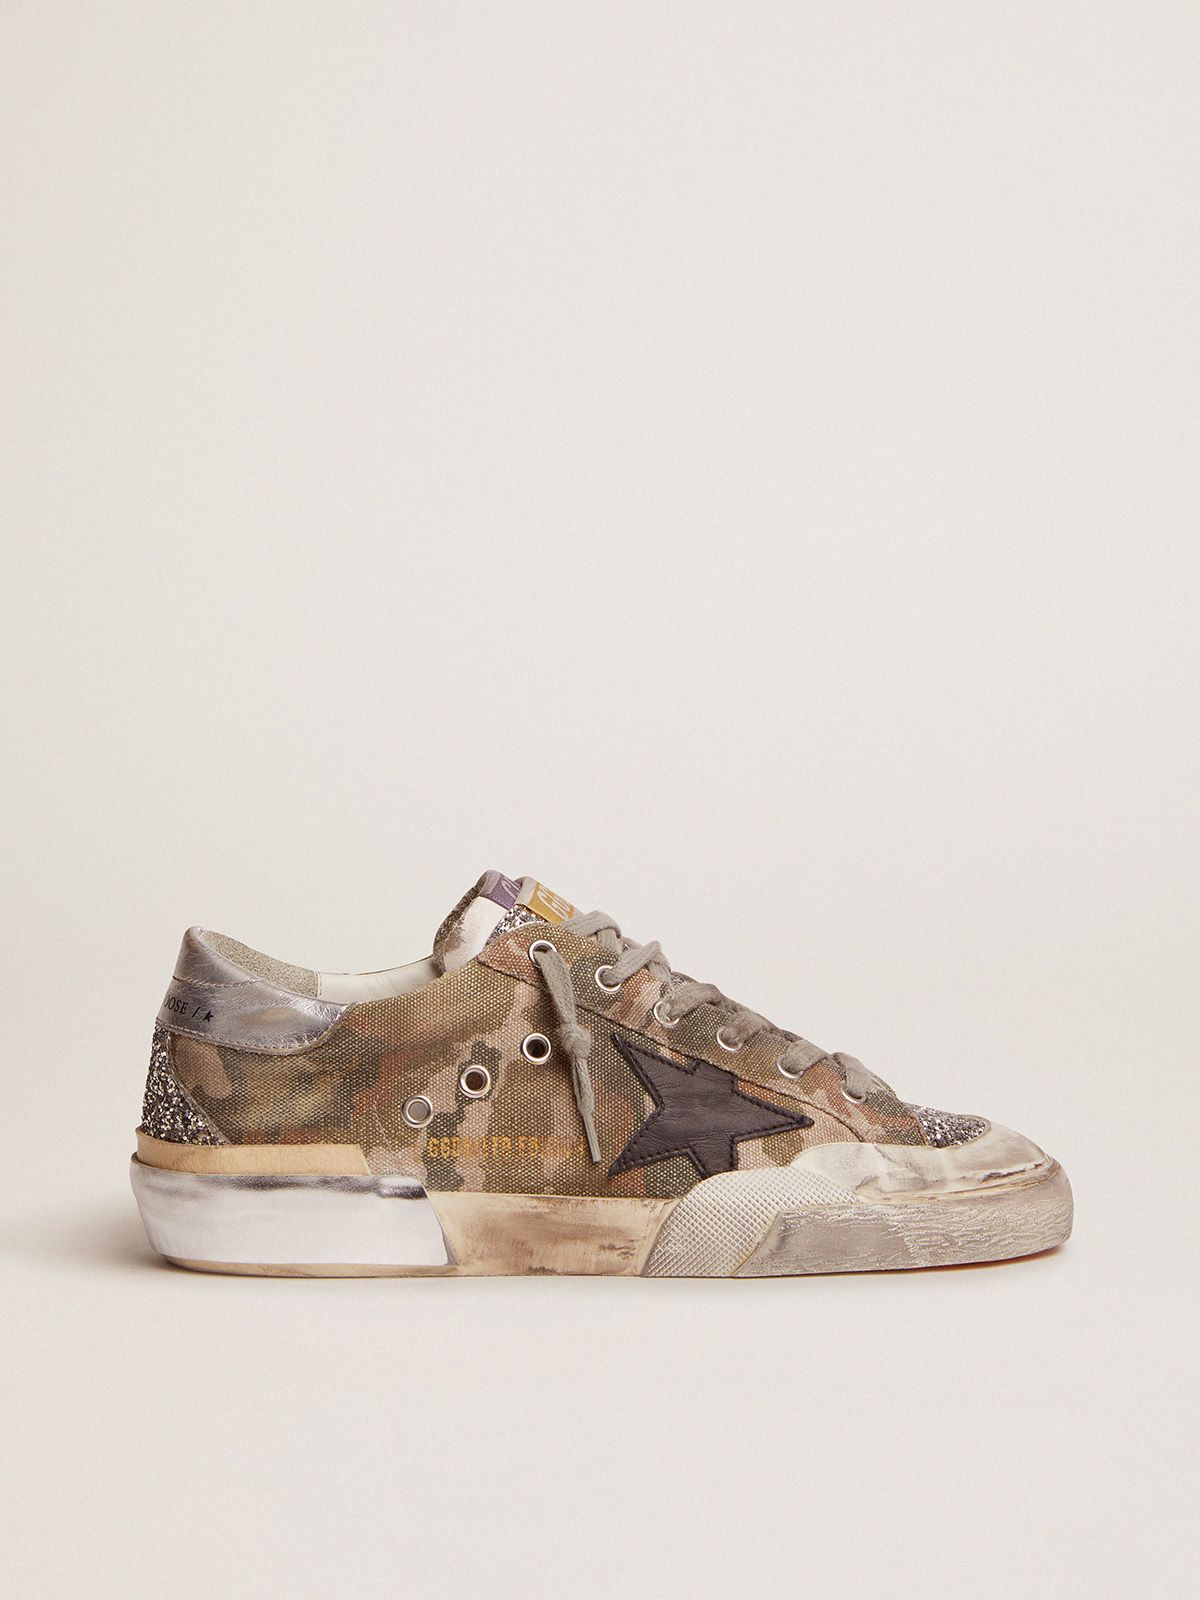 golden goose canvas multi-foxing Penstar Super-Star camouflage in with LAB sneakers